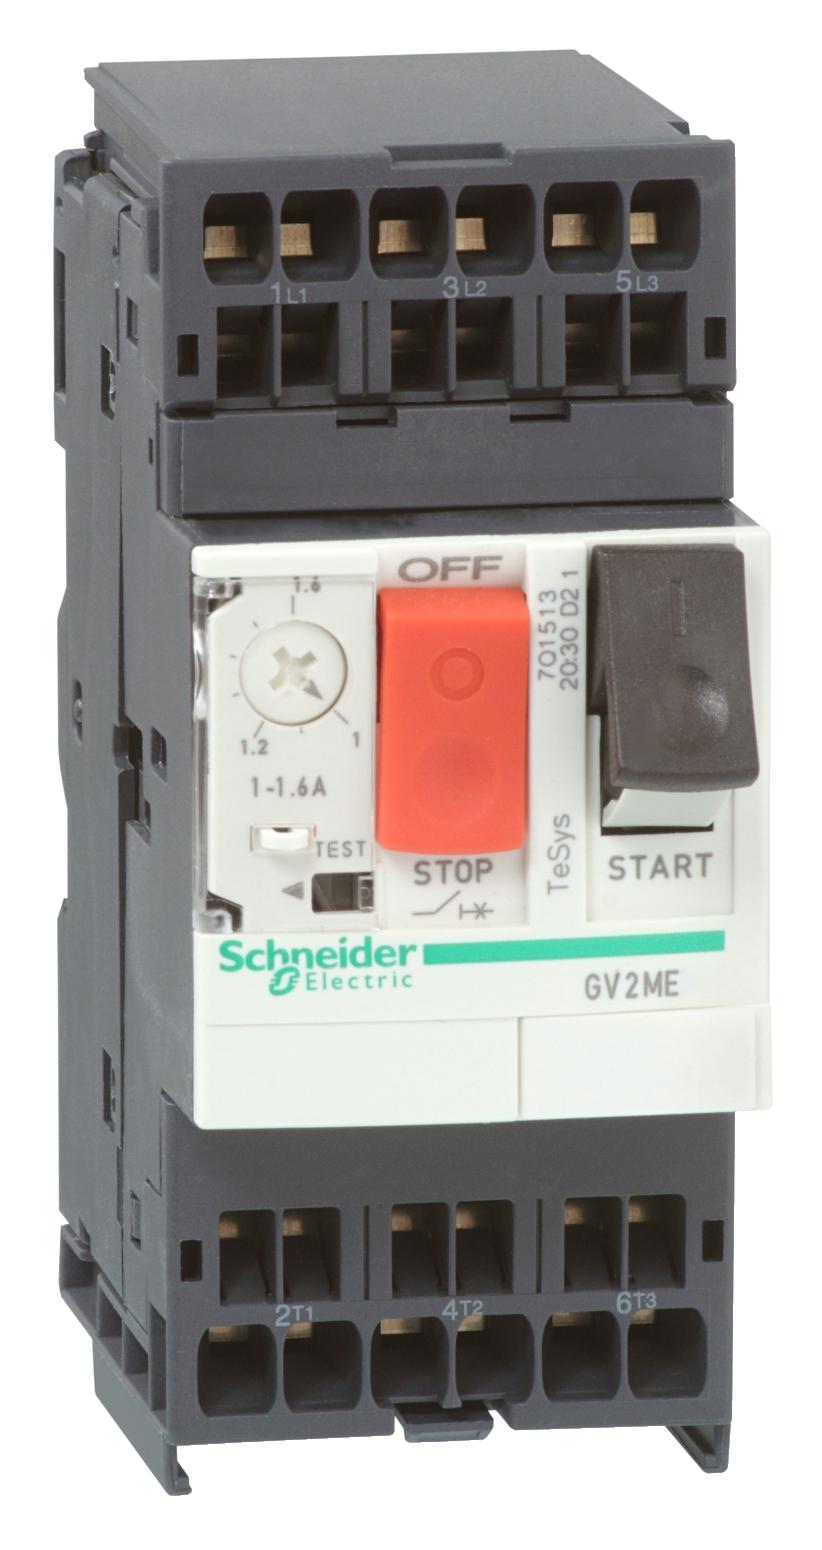 GV2ME023 THERMAL MAGNETIC CIRCUIT BREAKER SCHNEIDER ELECTRIC